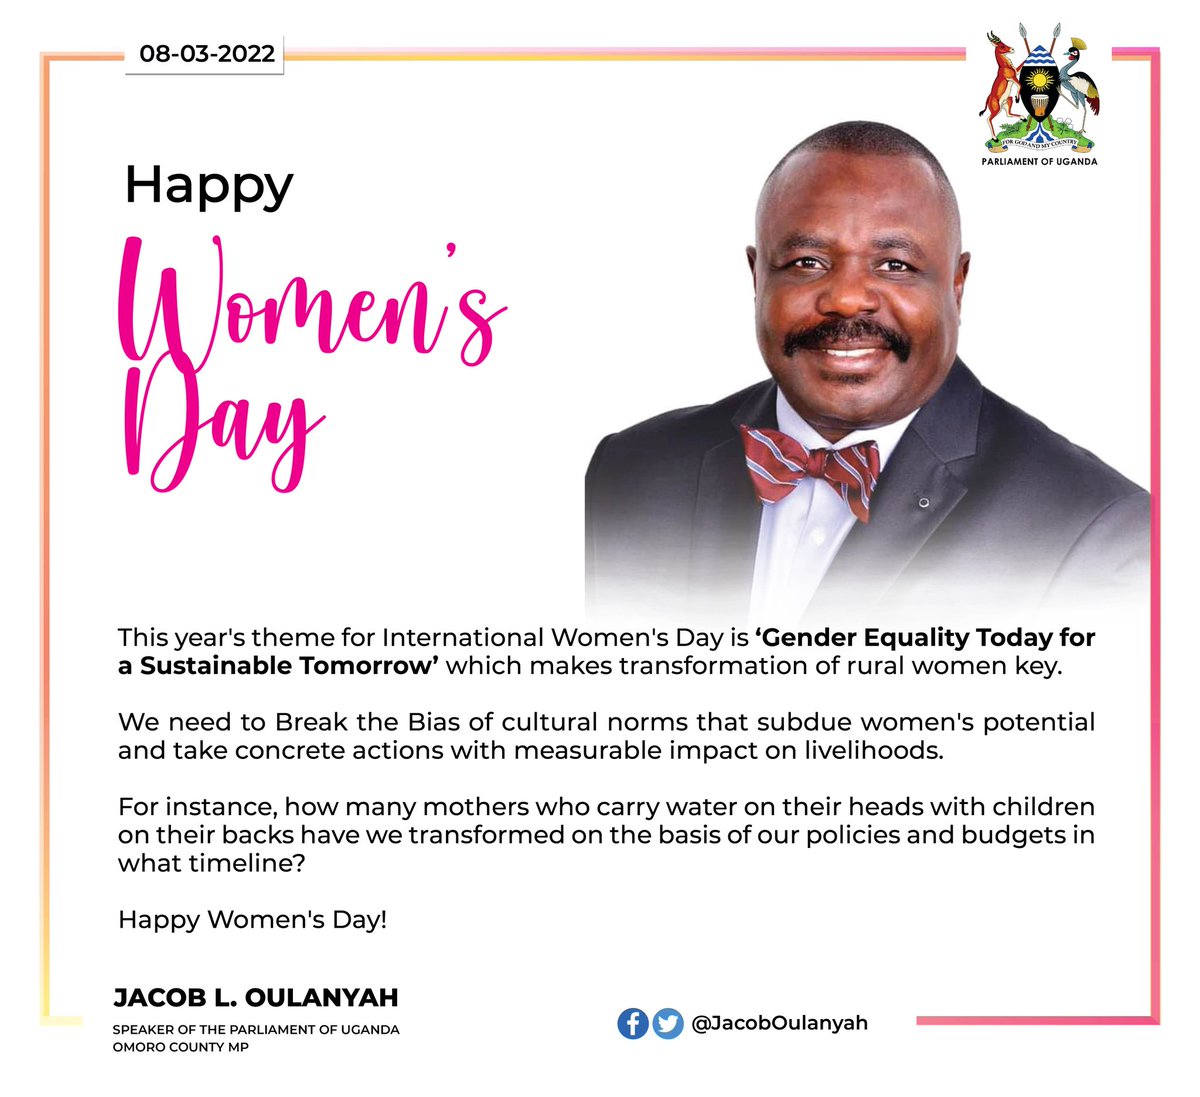 This year's theme 'Gender Equality Today for a Sustainable Tomorrow' makes transformation of rural women key. We need to #BreakTheBias of cultural norms that subdue women's potential and take concrete actions with measurable impact on livelihoods. Happy #WomenDay! #IWD2022